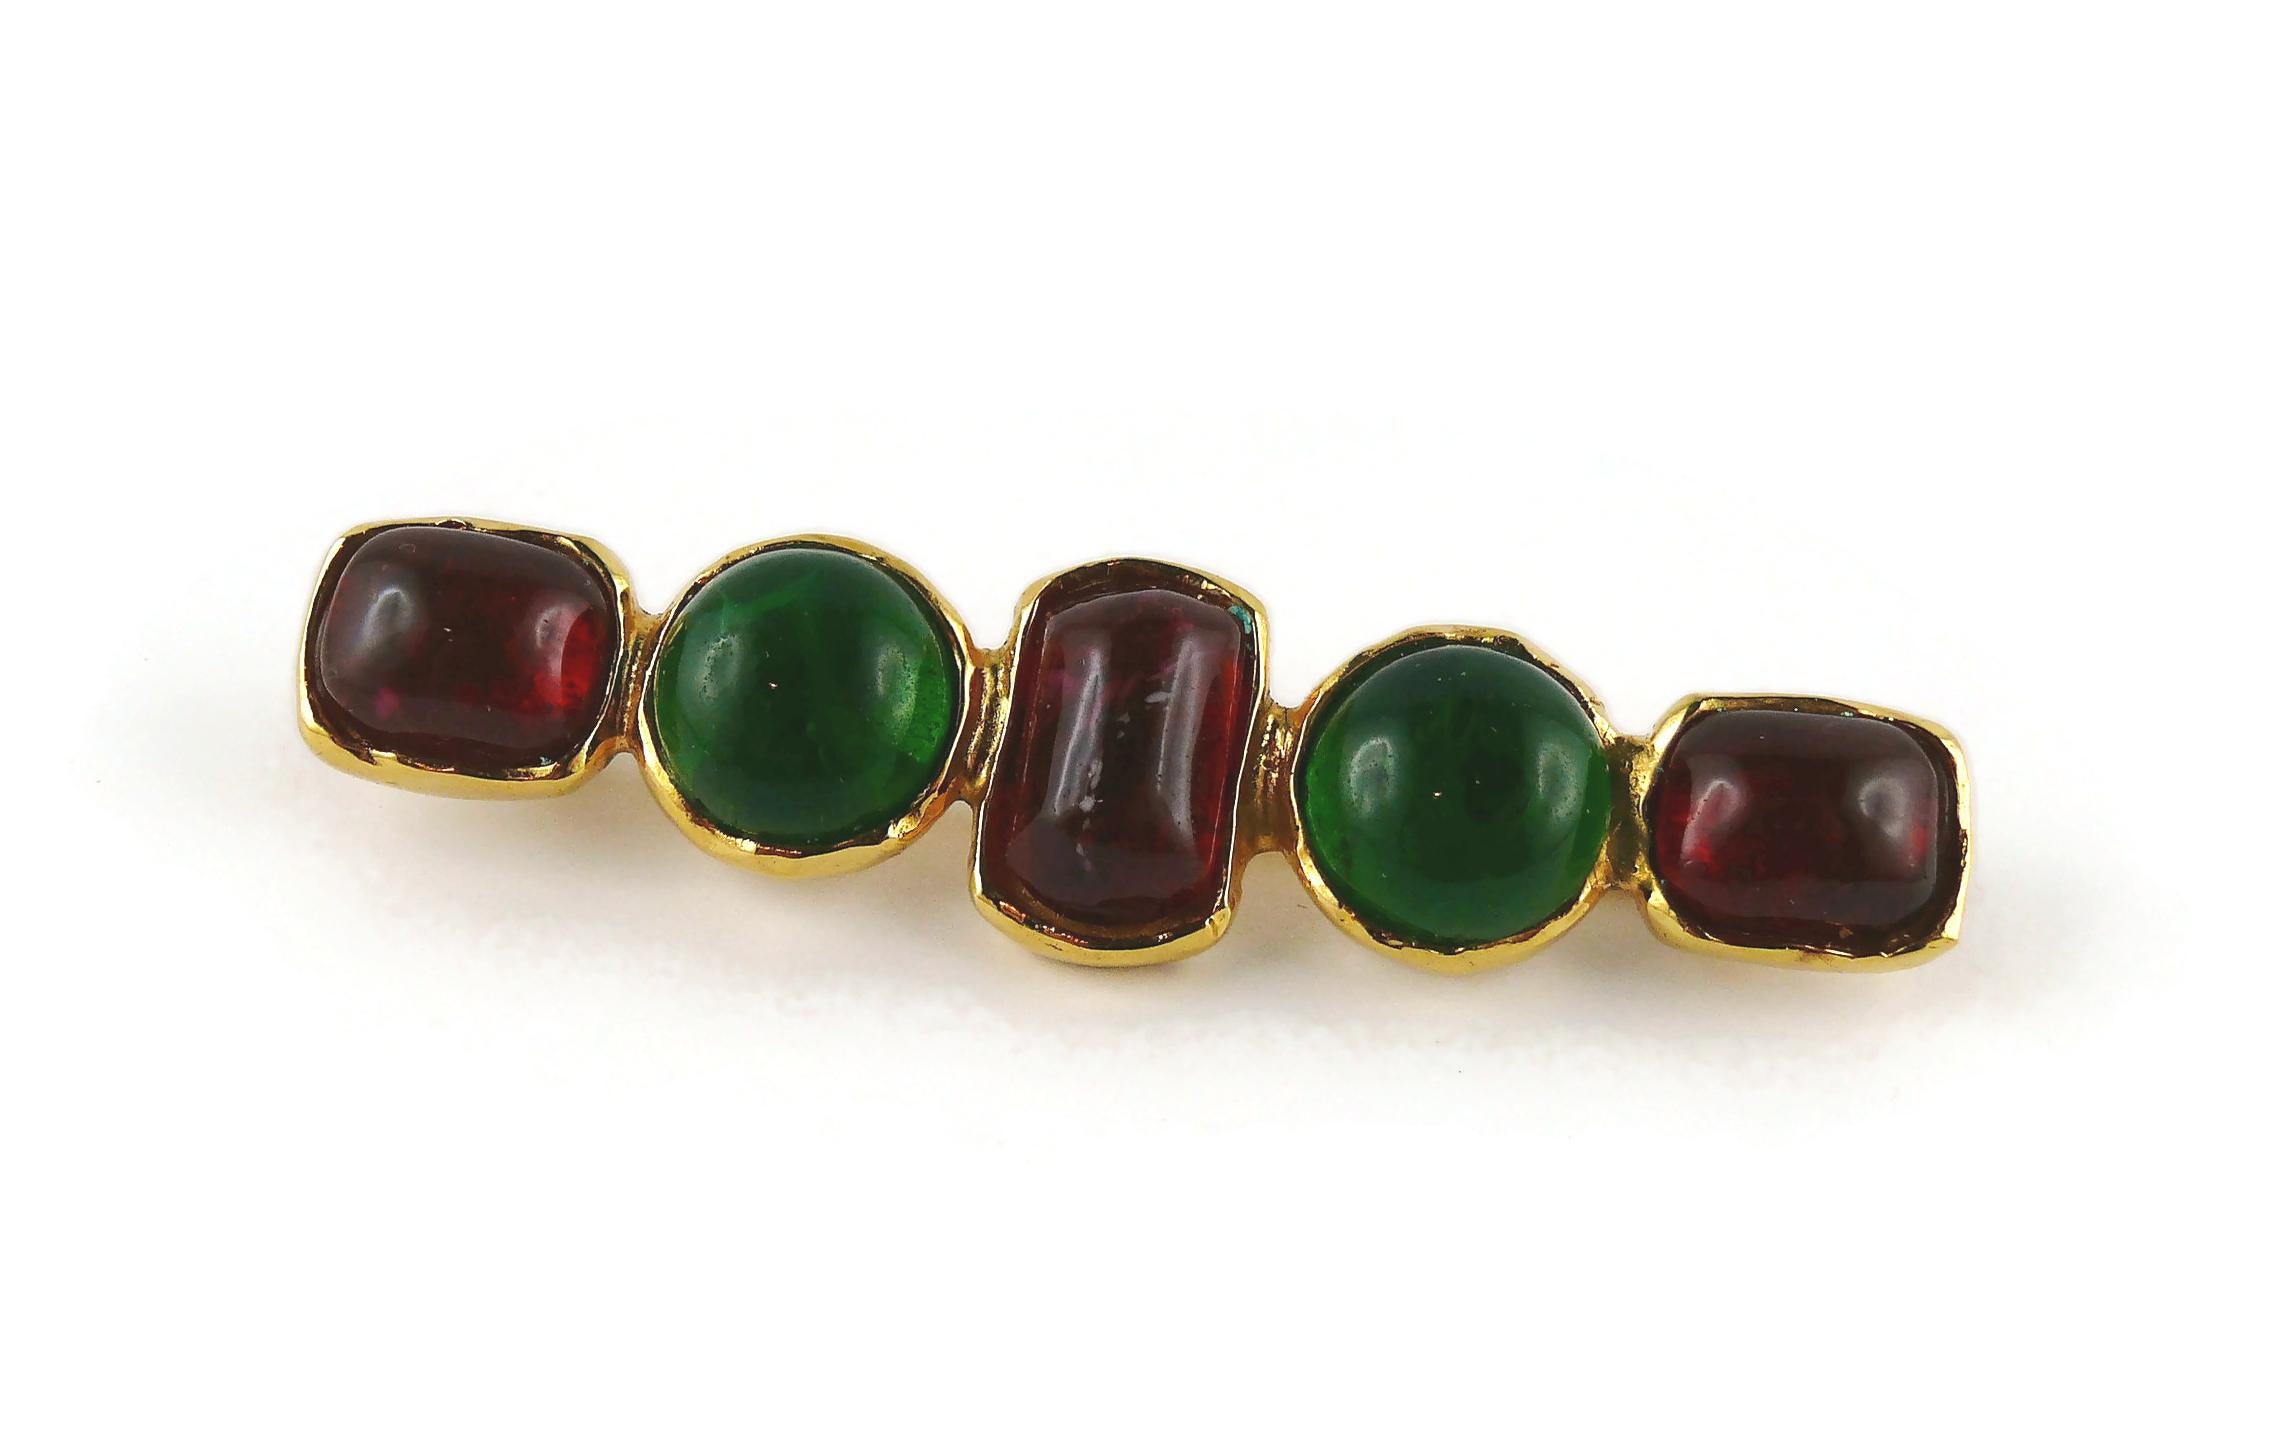 CHANEL vintage gold toned bar brooch embellished with red and green GRIPOIX glass cabochons.

Embossed CHANEL and 105.

Indicative measurements : length approx. 7.2 cm (2.83 inches) / max. width approx. 1.7 cm (0.67 inch).

NOTES
- This is a